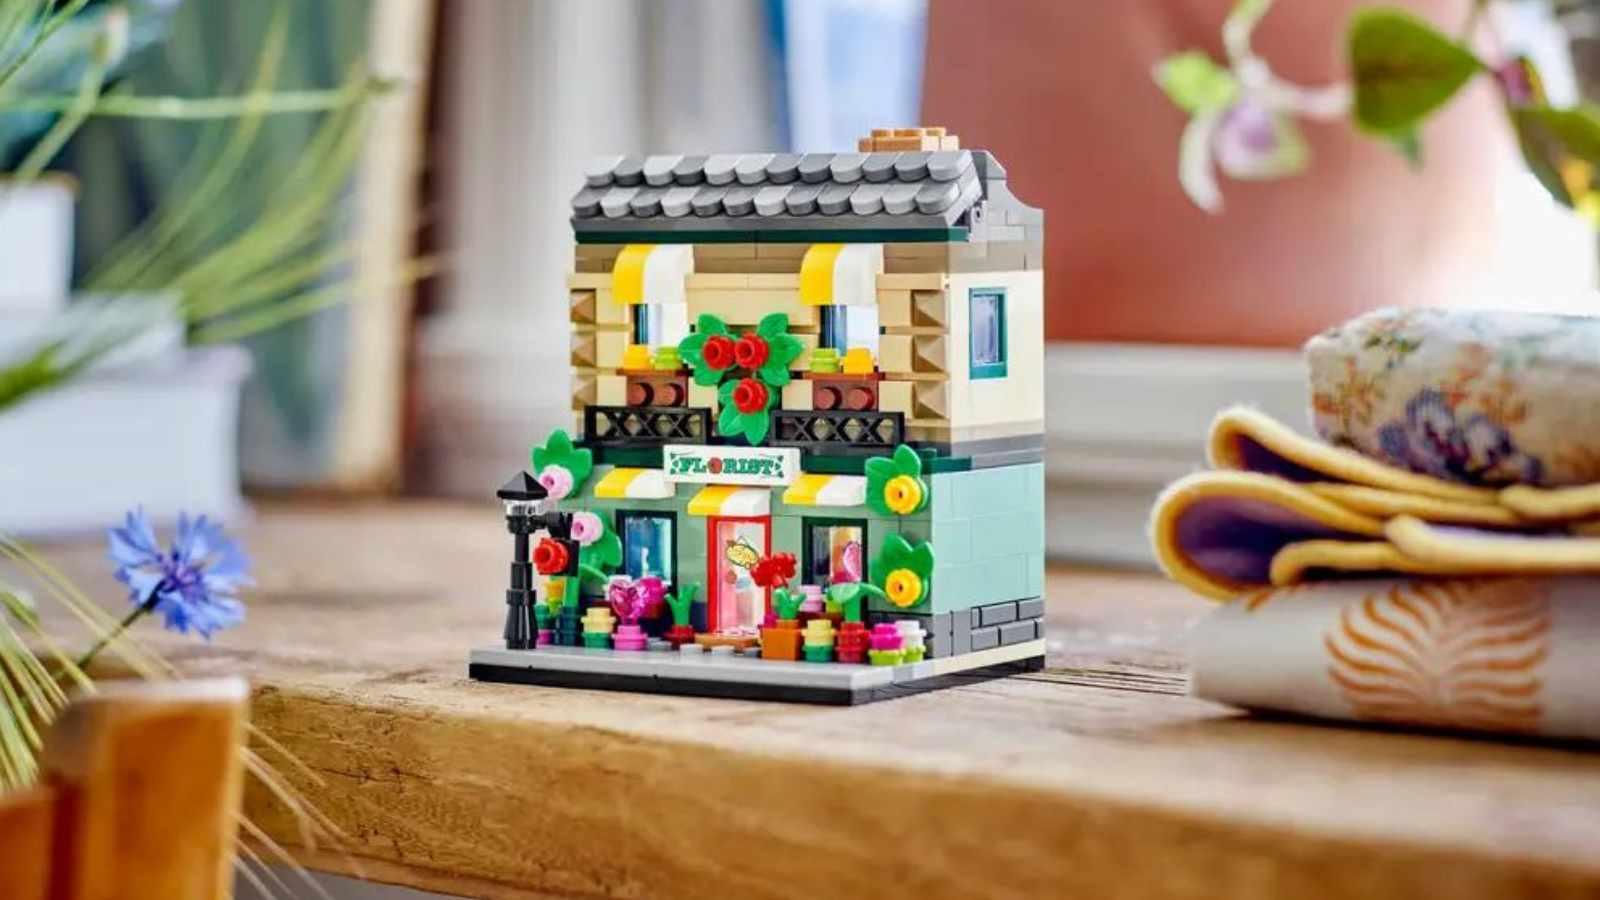 The LEGO Flower Store set on display